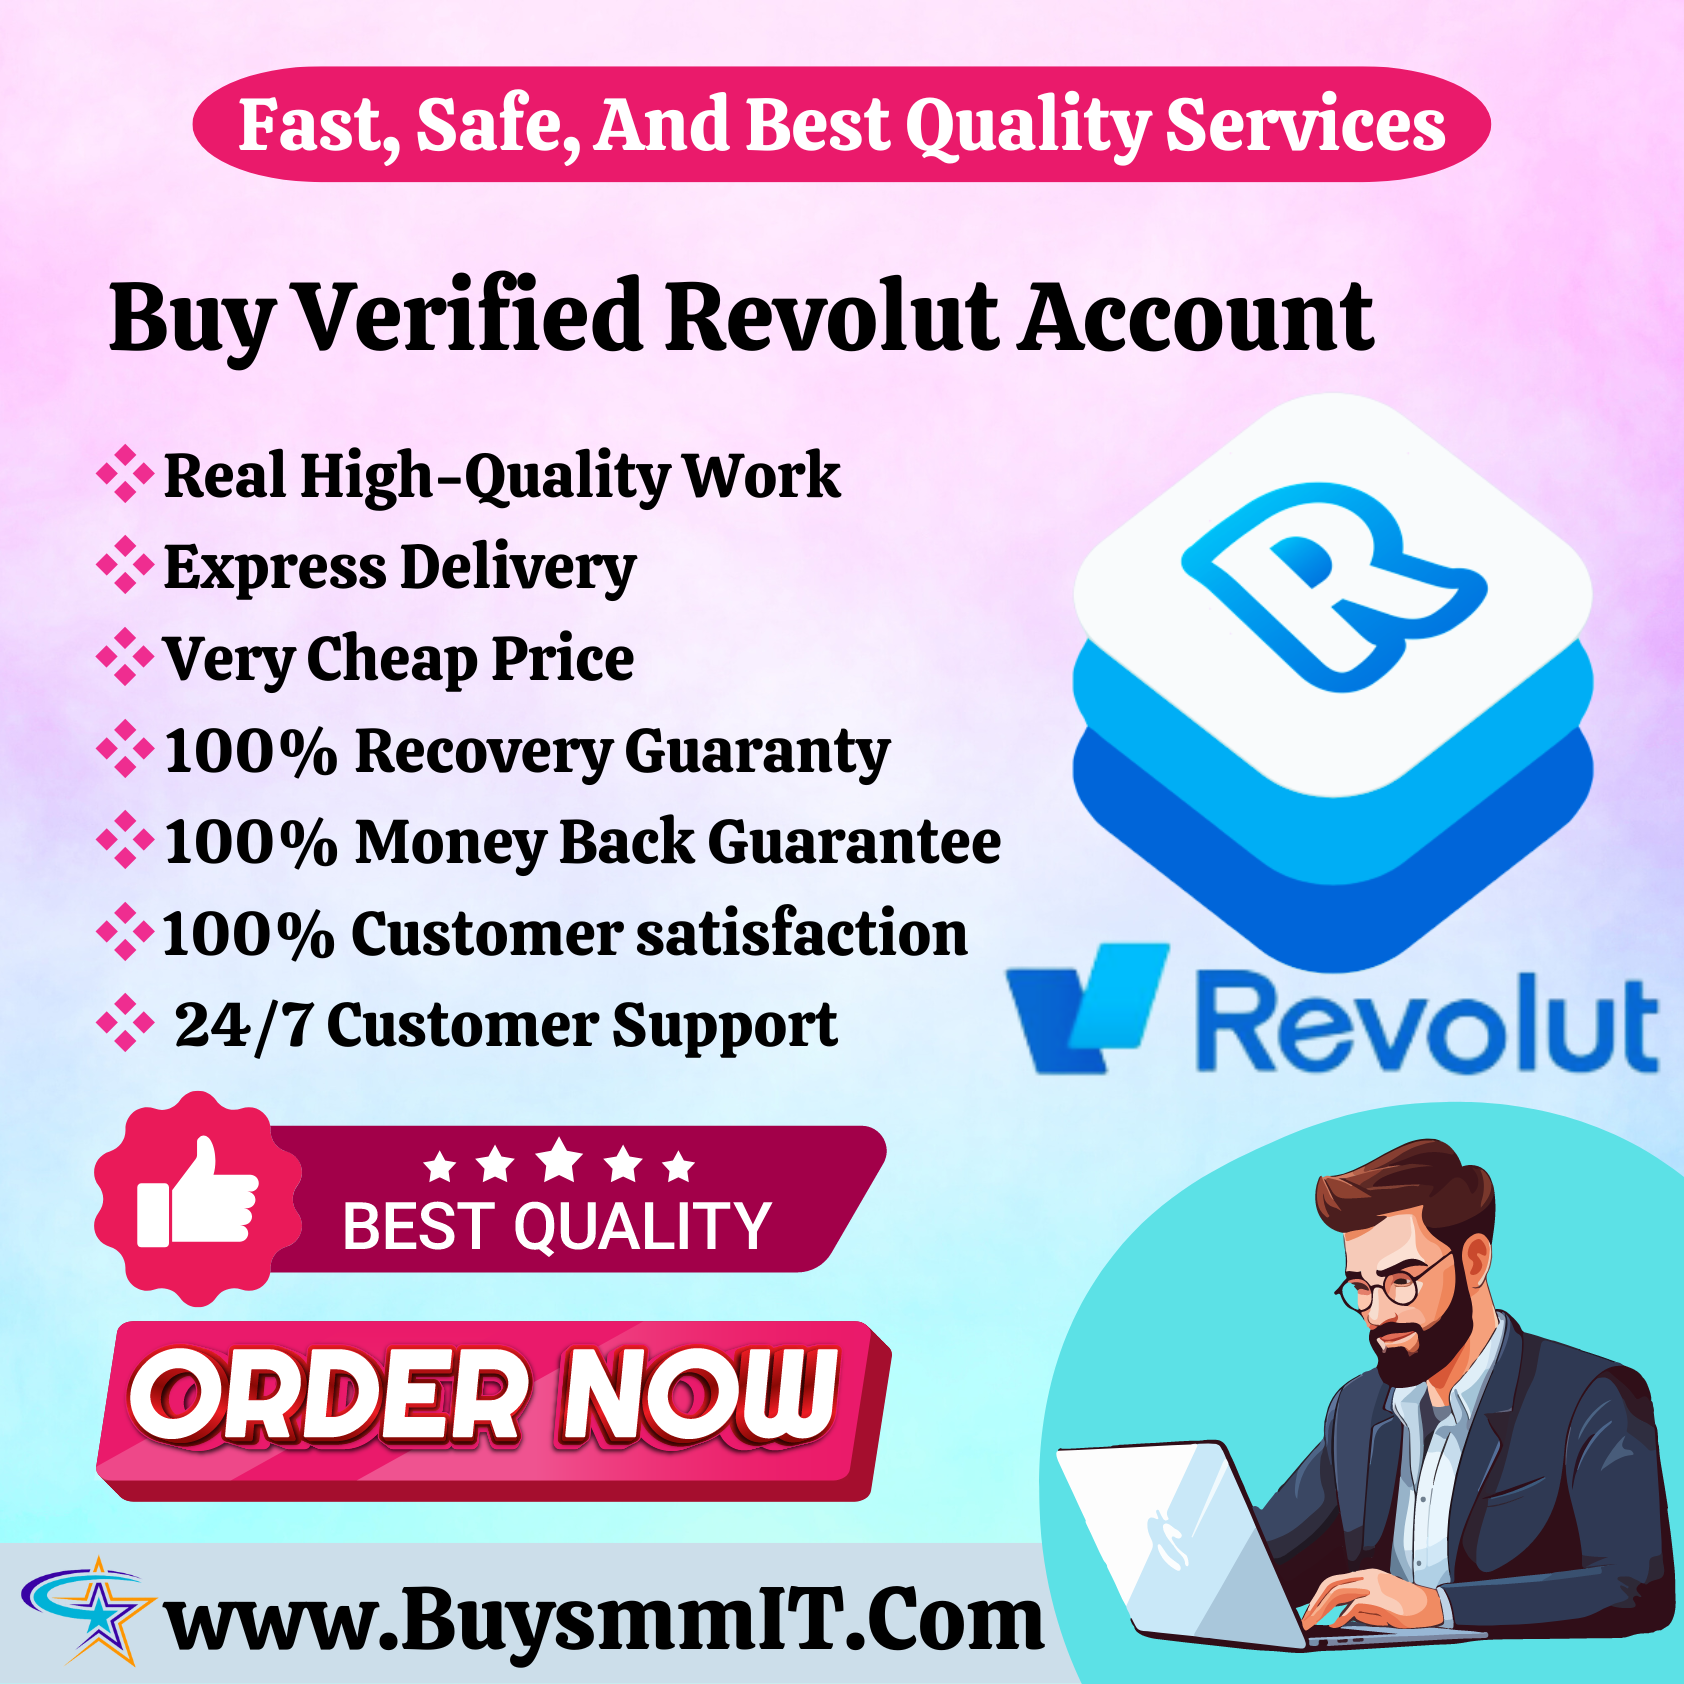 Buy Verified Revolut Account - 100% Secure Business/Personal